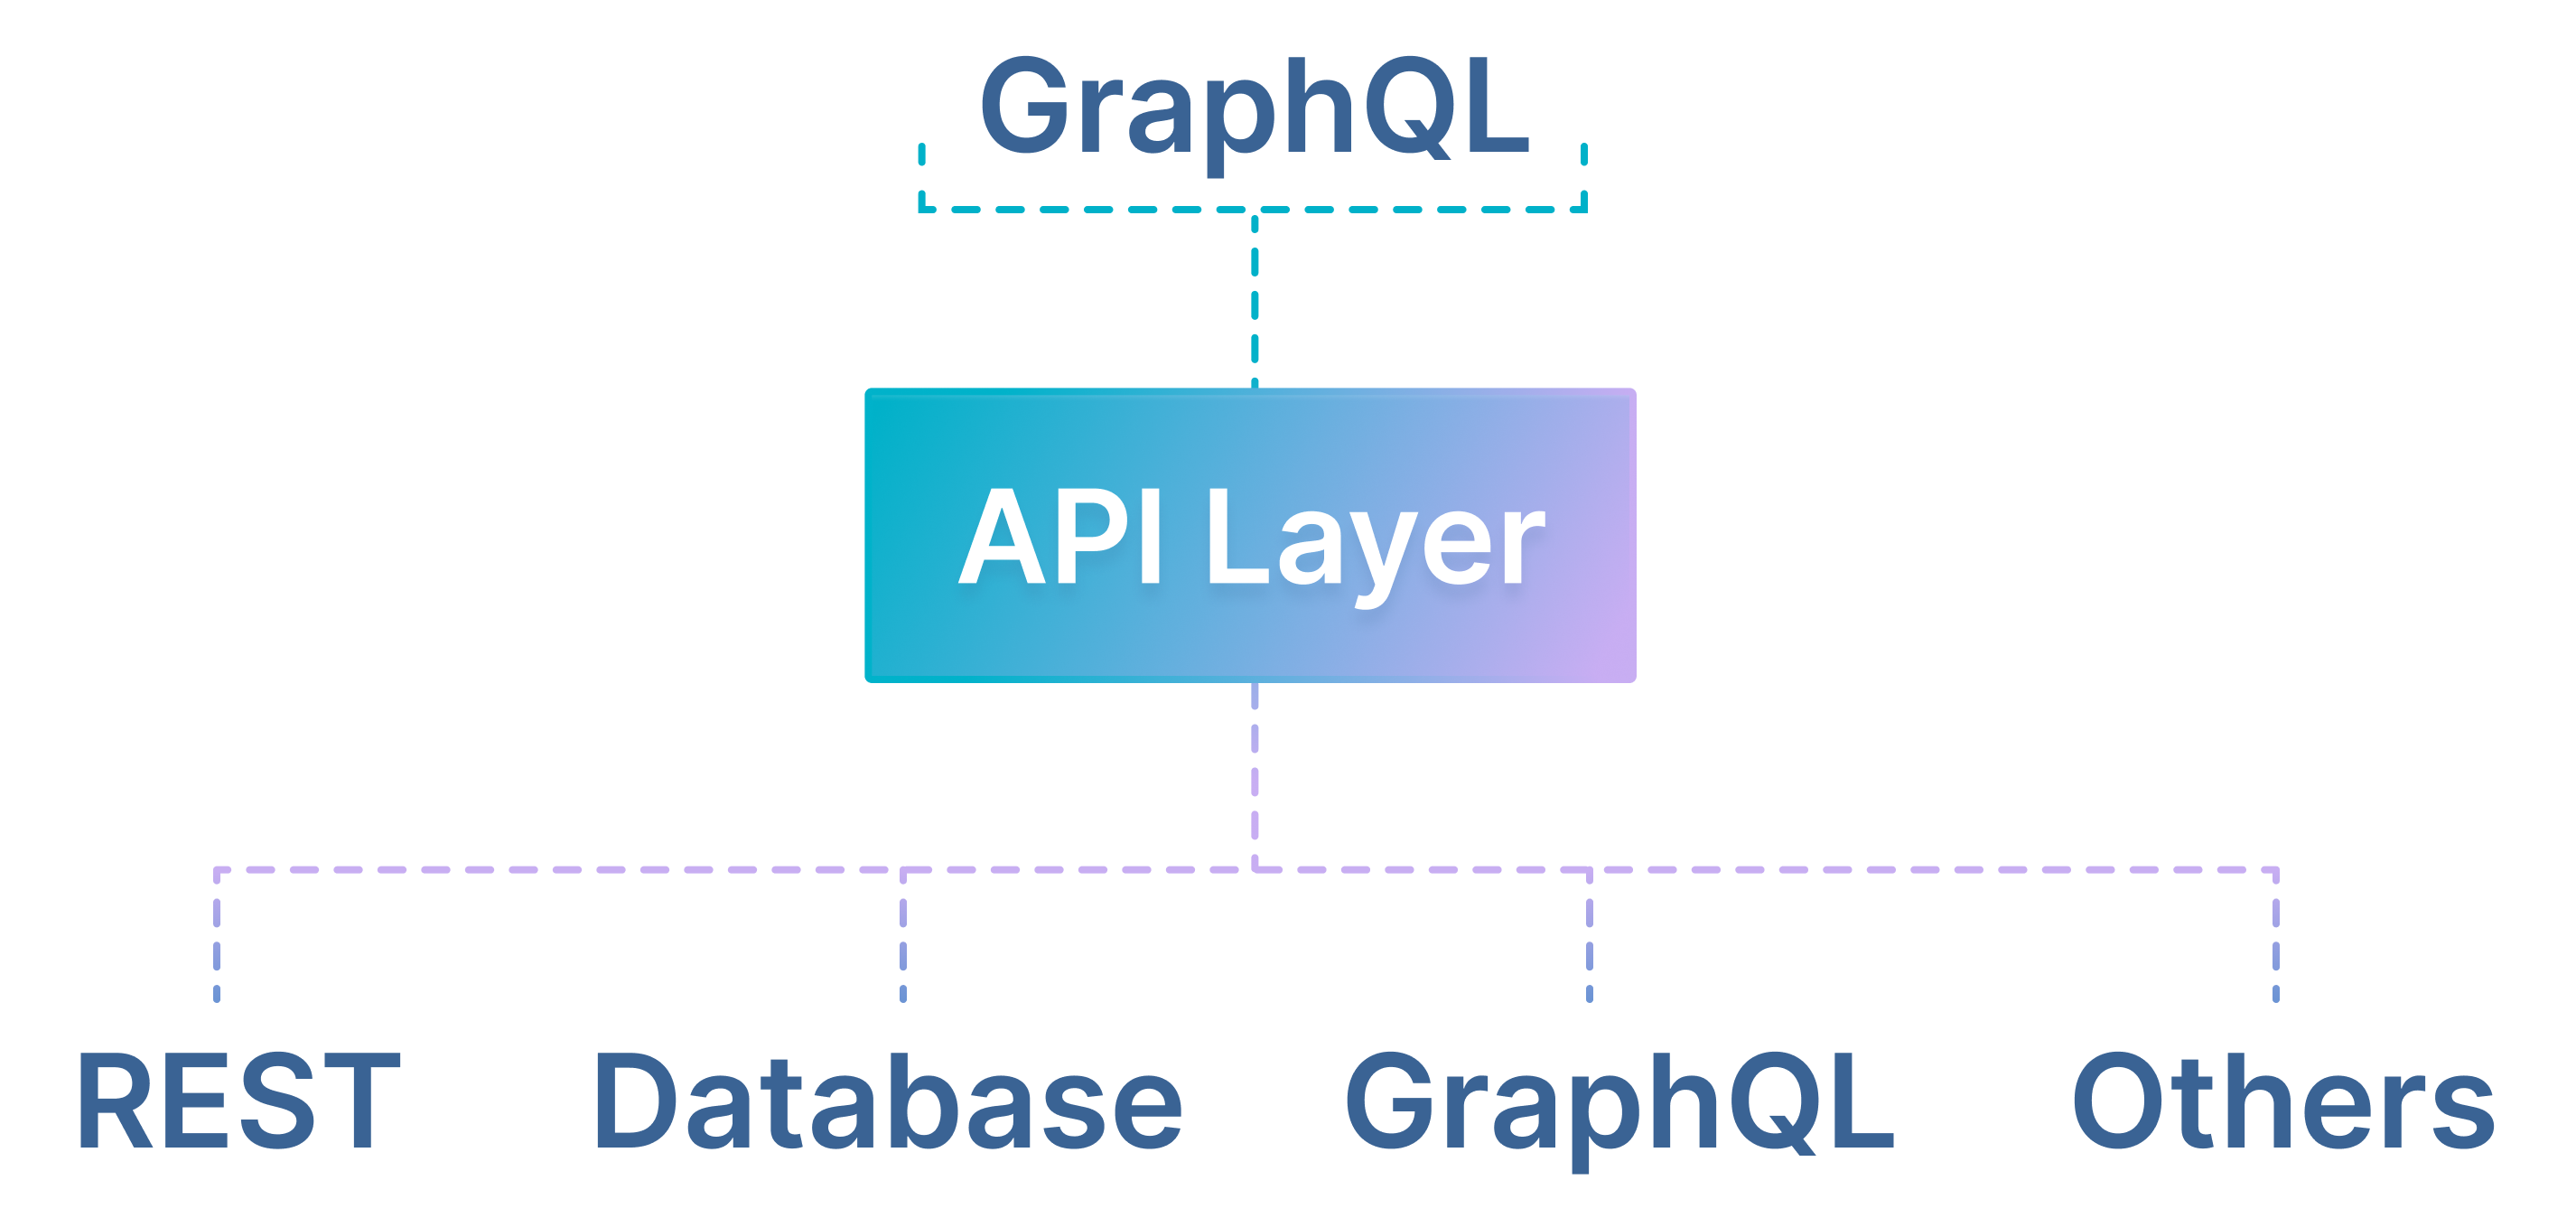 Various backends connection through an API level, then connecting to GraphQL